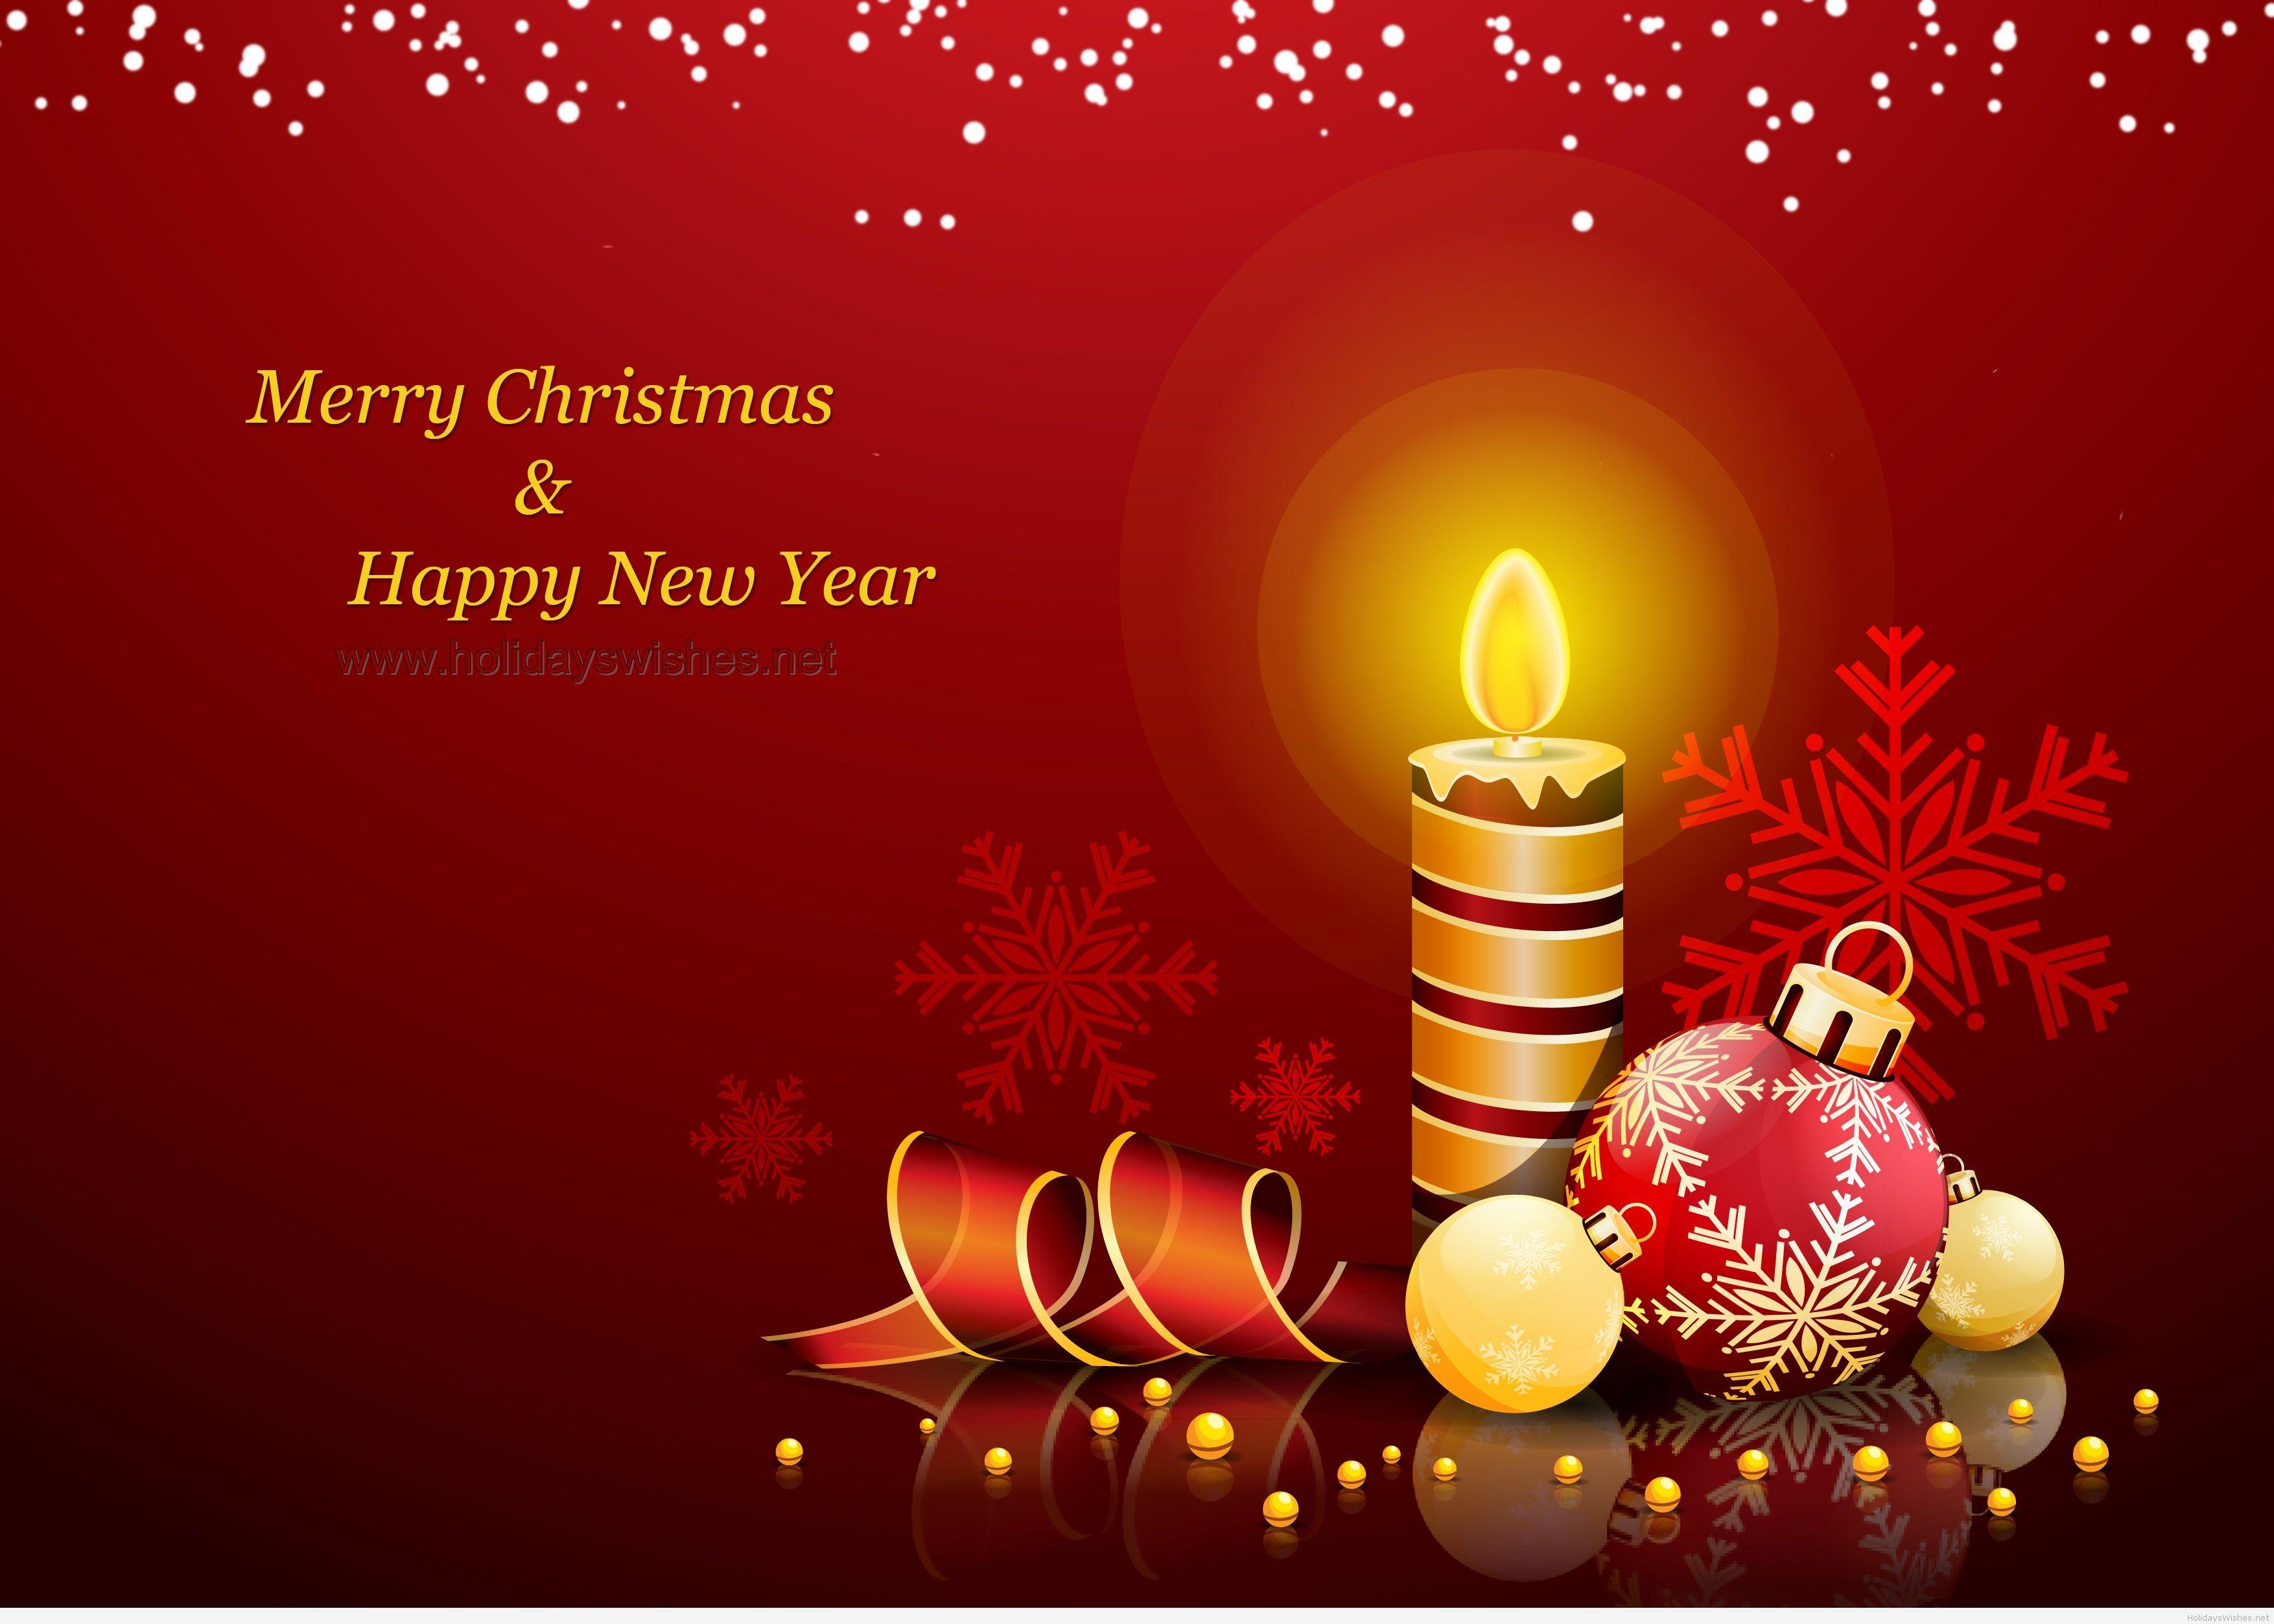 Happy new year 2015 and Merry Christmas wallpaper